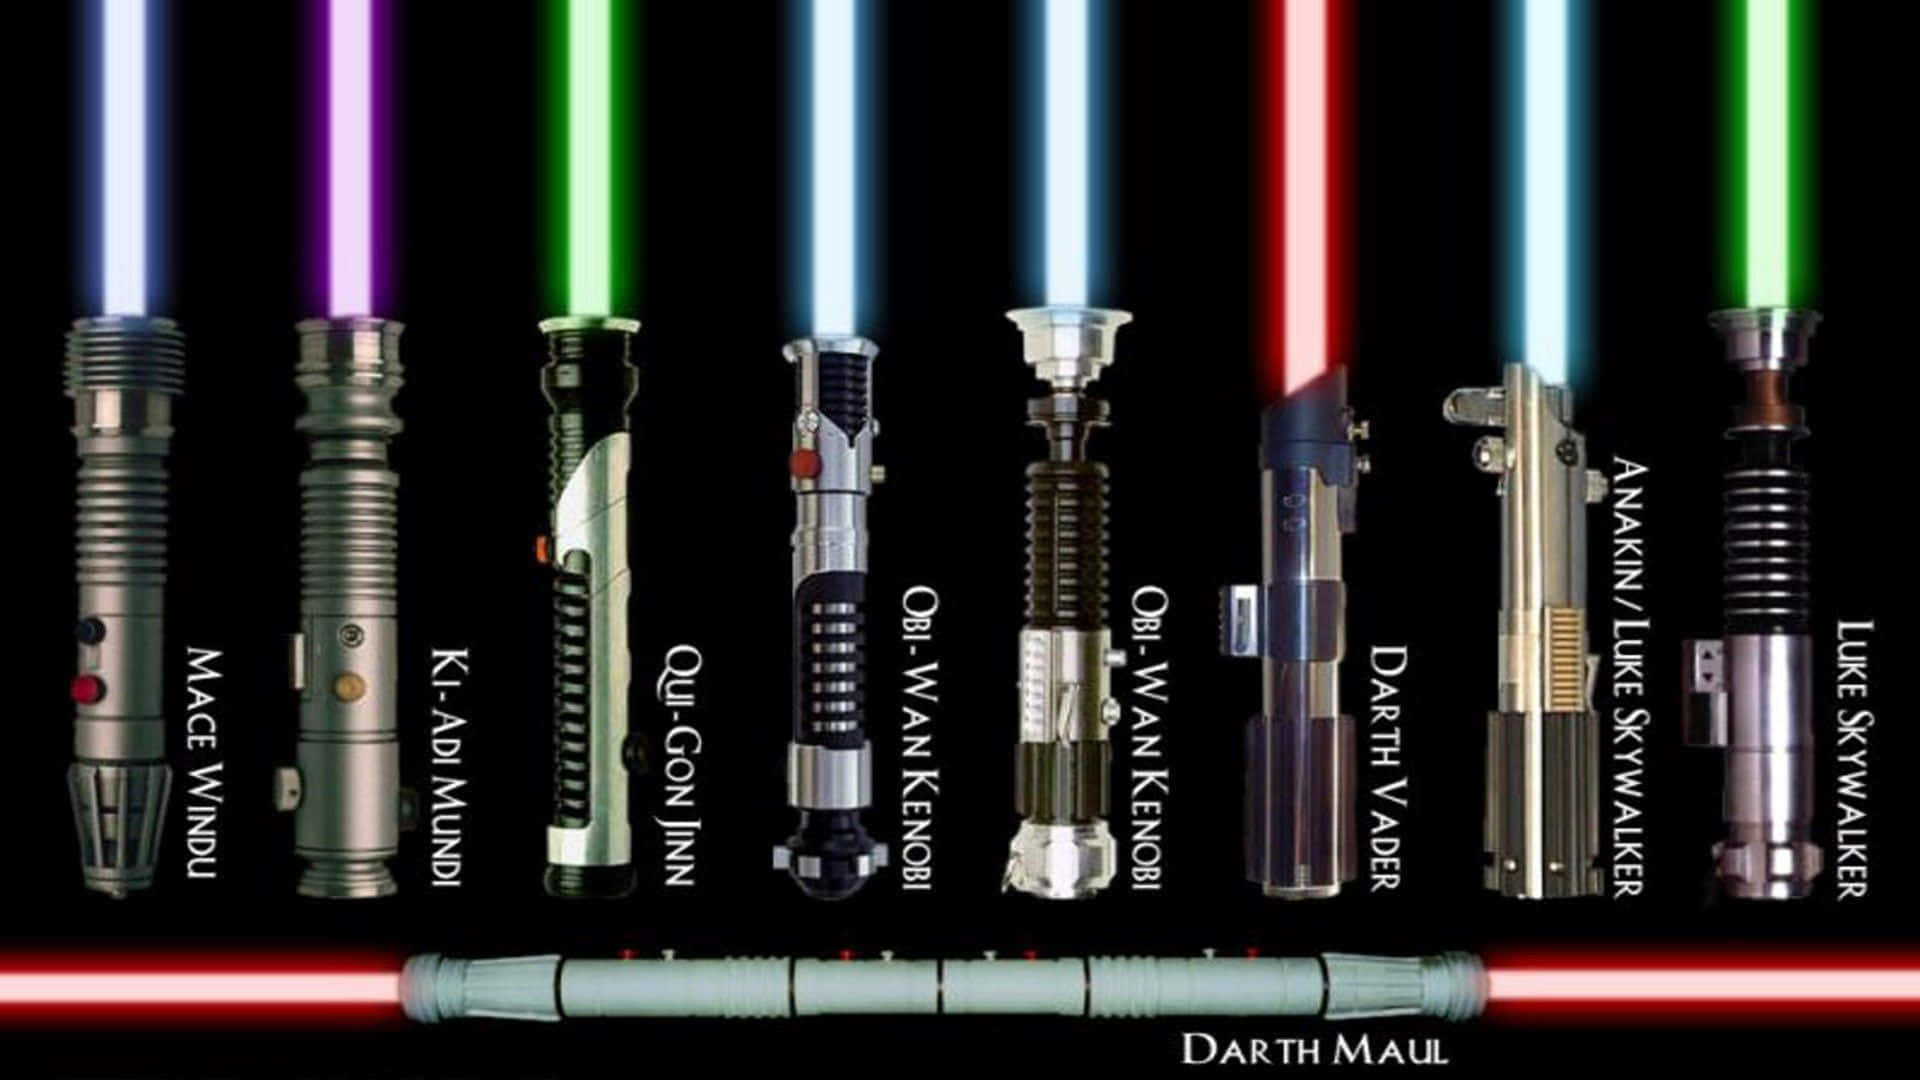 Show off your intergalactic pride with this iconic Star Wars Lightsaber Wallpaper